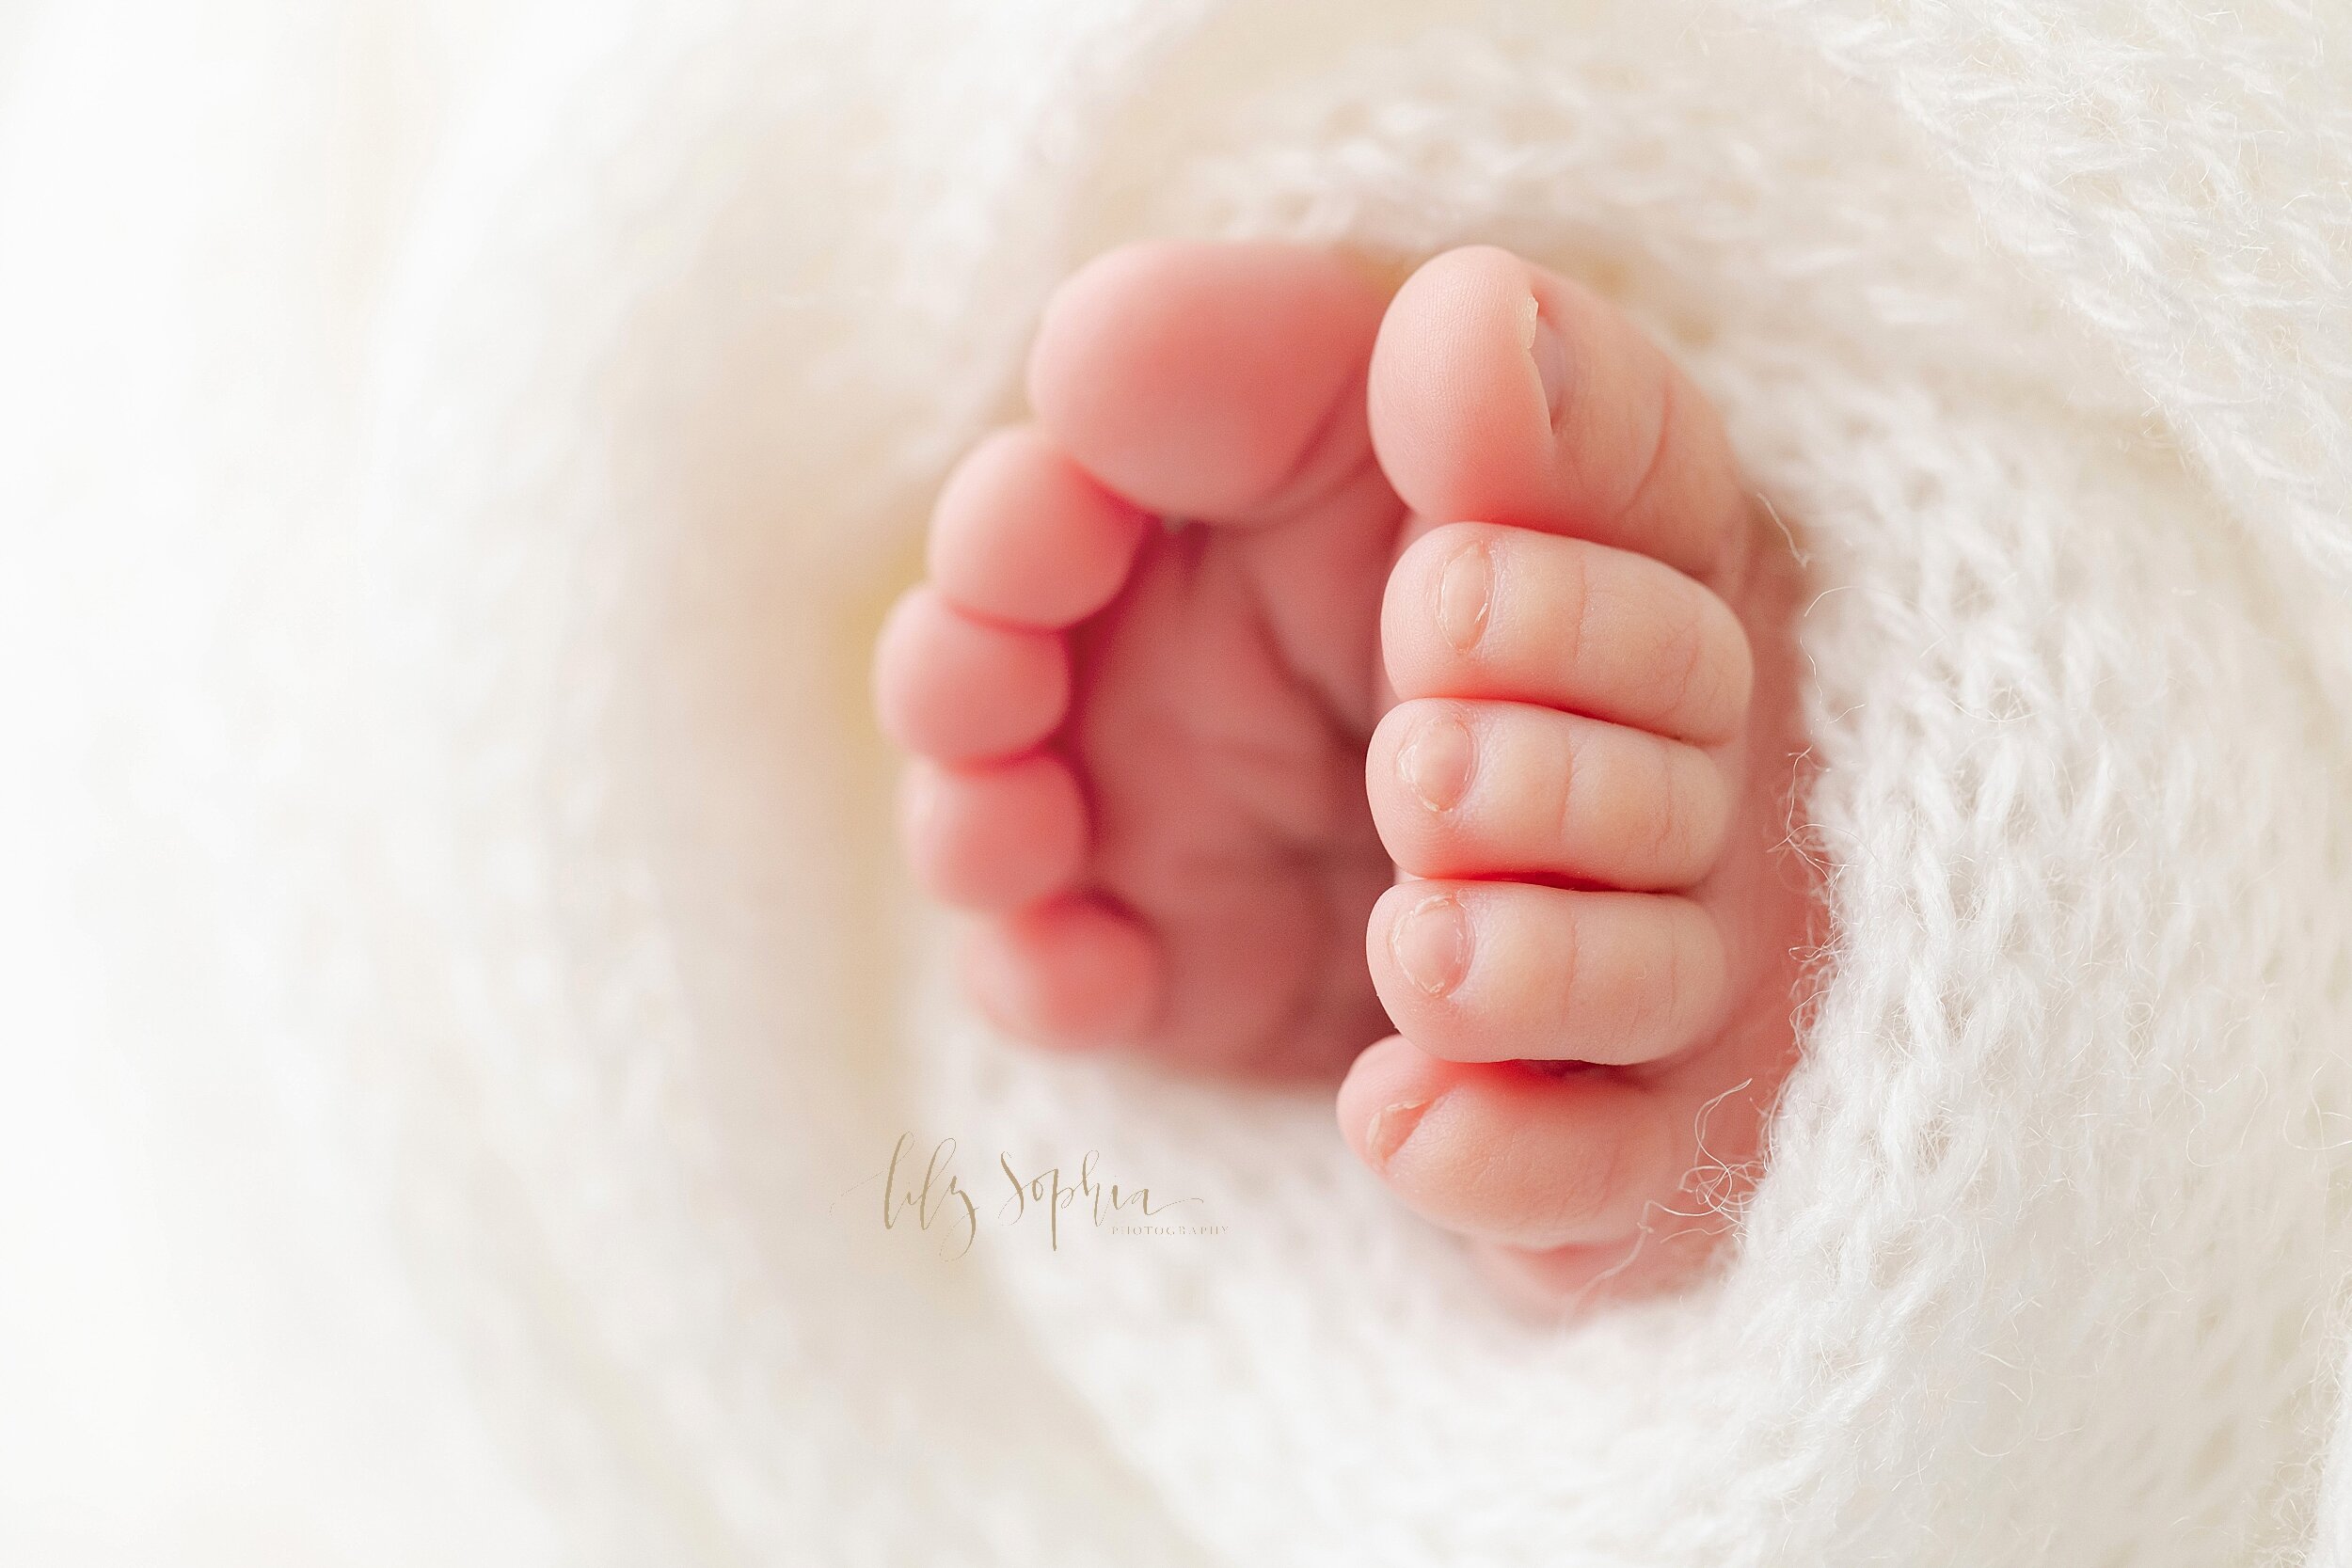  Newborn photo of a newborn boy’s tiny toes as they peek out from a soft knitted blanket taken in the Lily Sophia Photography Studio in Ponce City Market in Atlanta in natural light. 